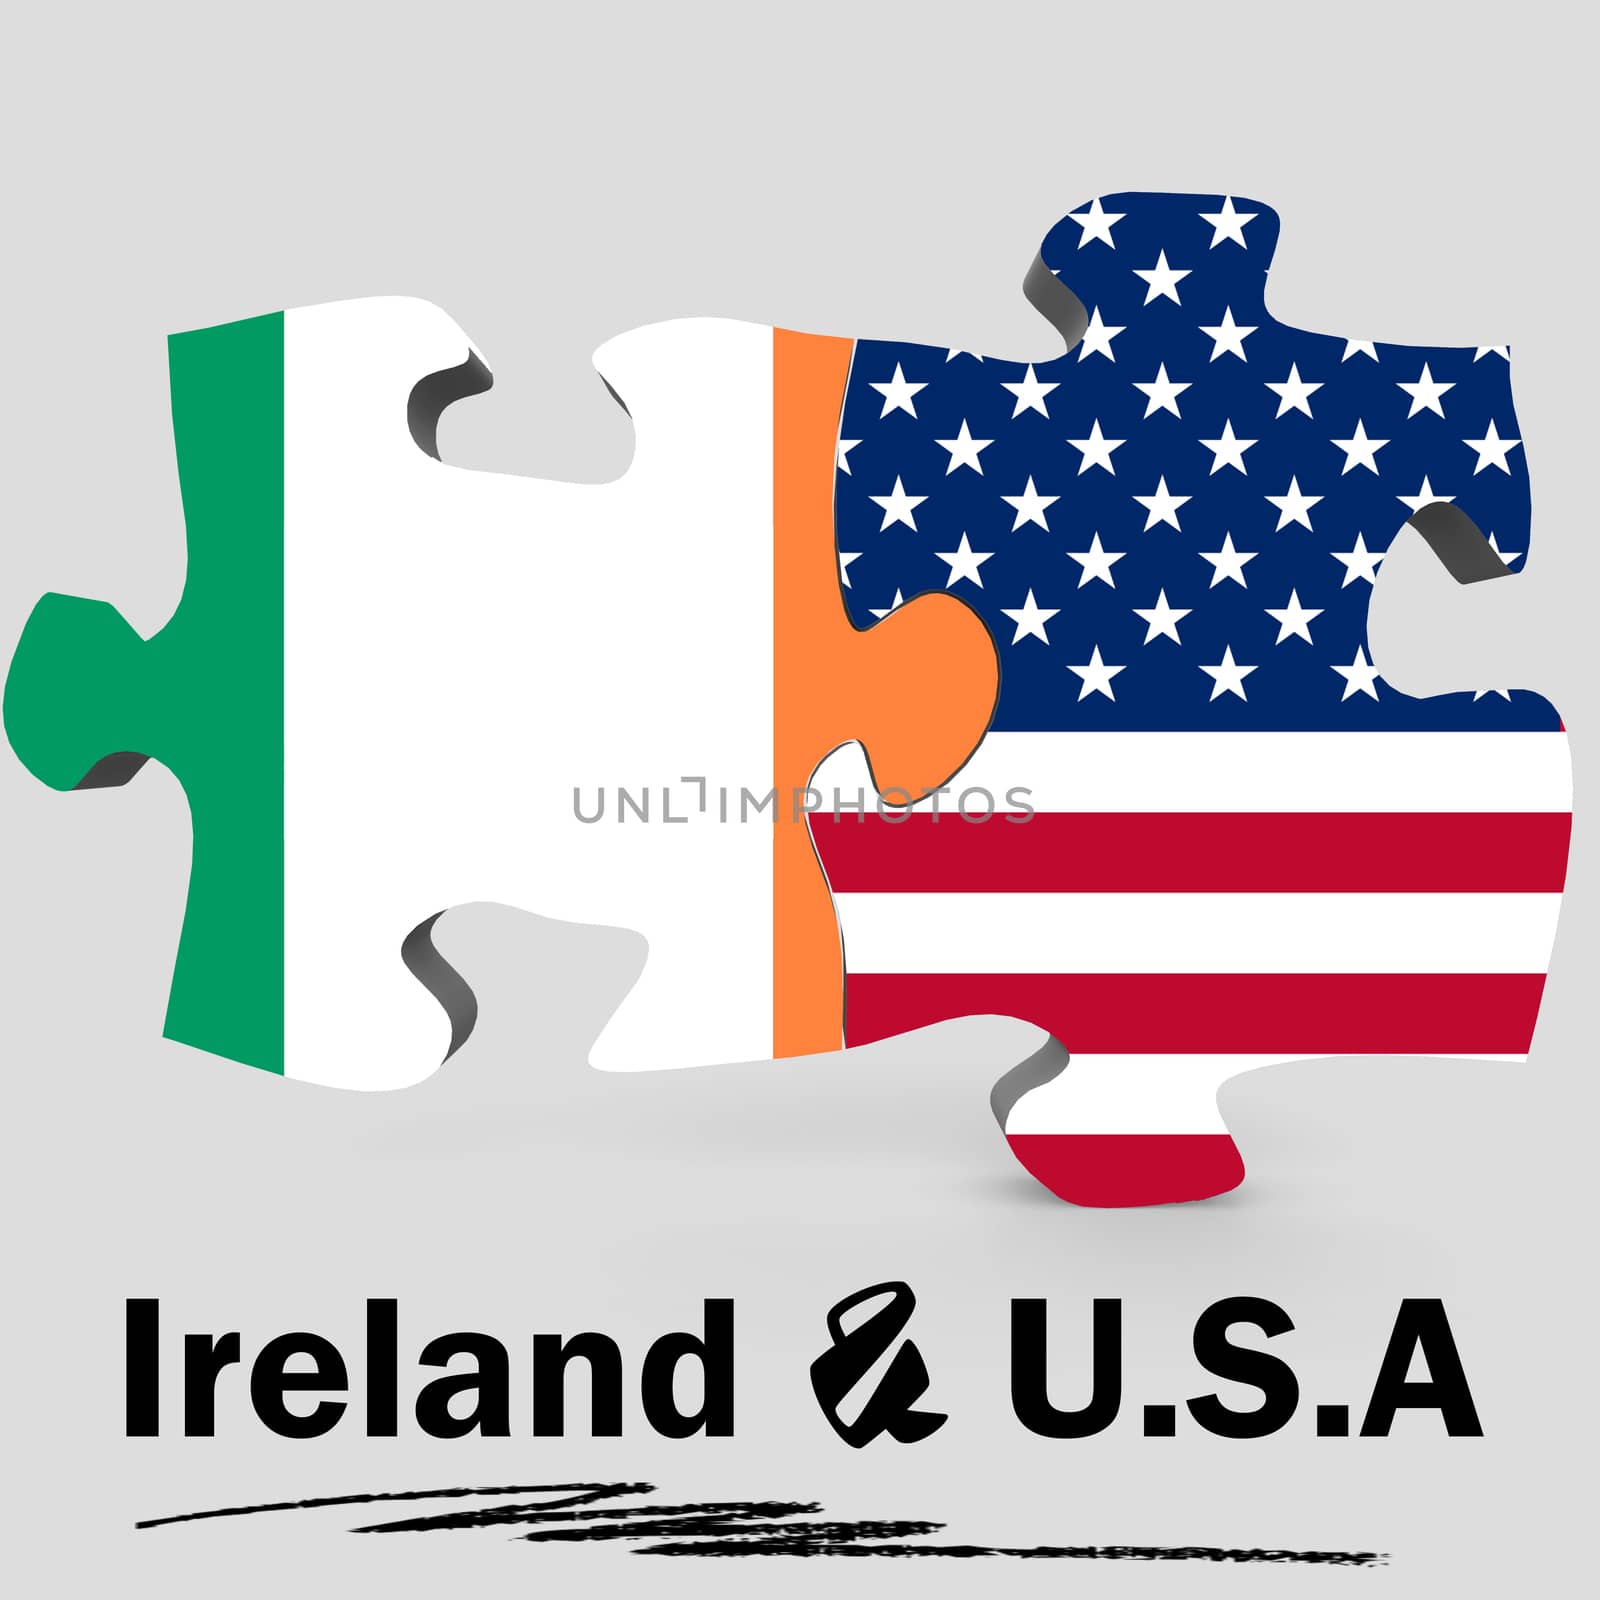 USA and Ireland Flags in puzzle isolated on white background, 3D rendering